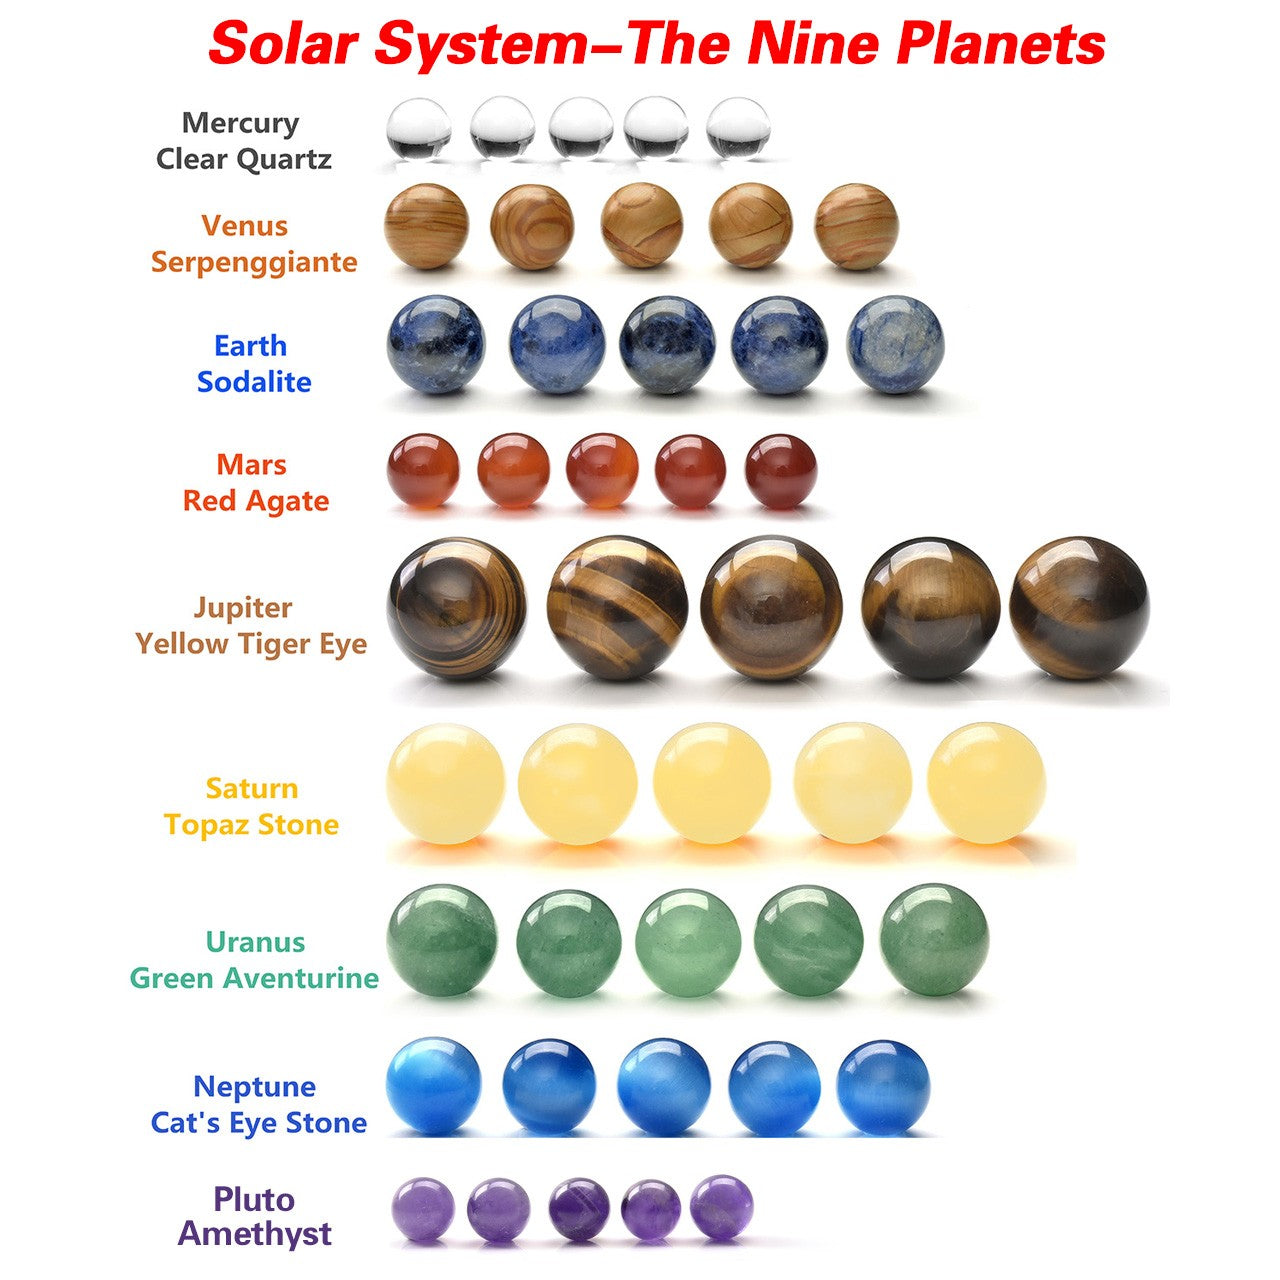 Personalized Solar System 9 Planets Crystal Ball Ornaments | Jovivi